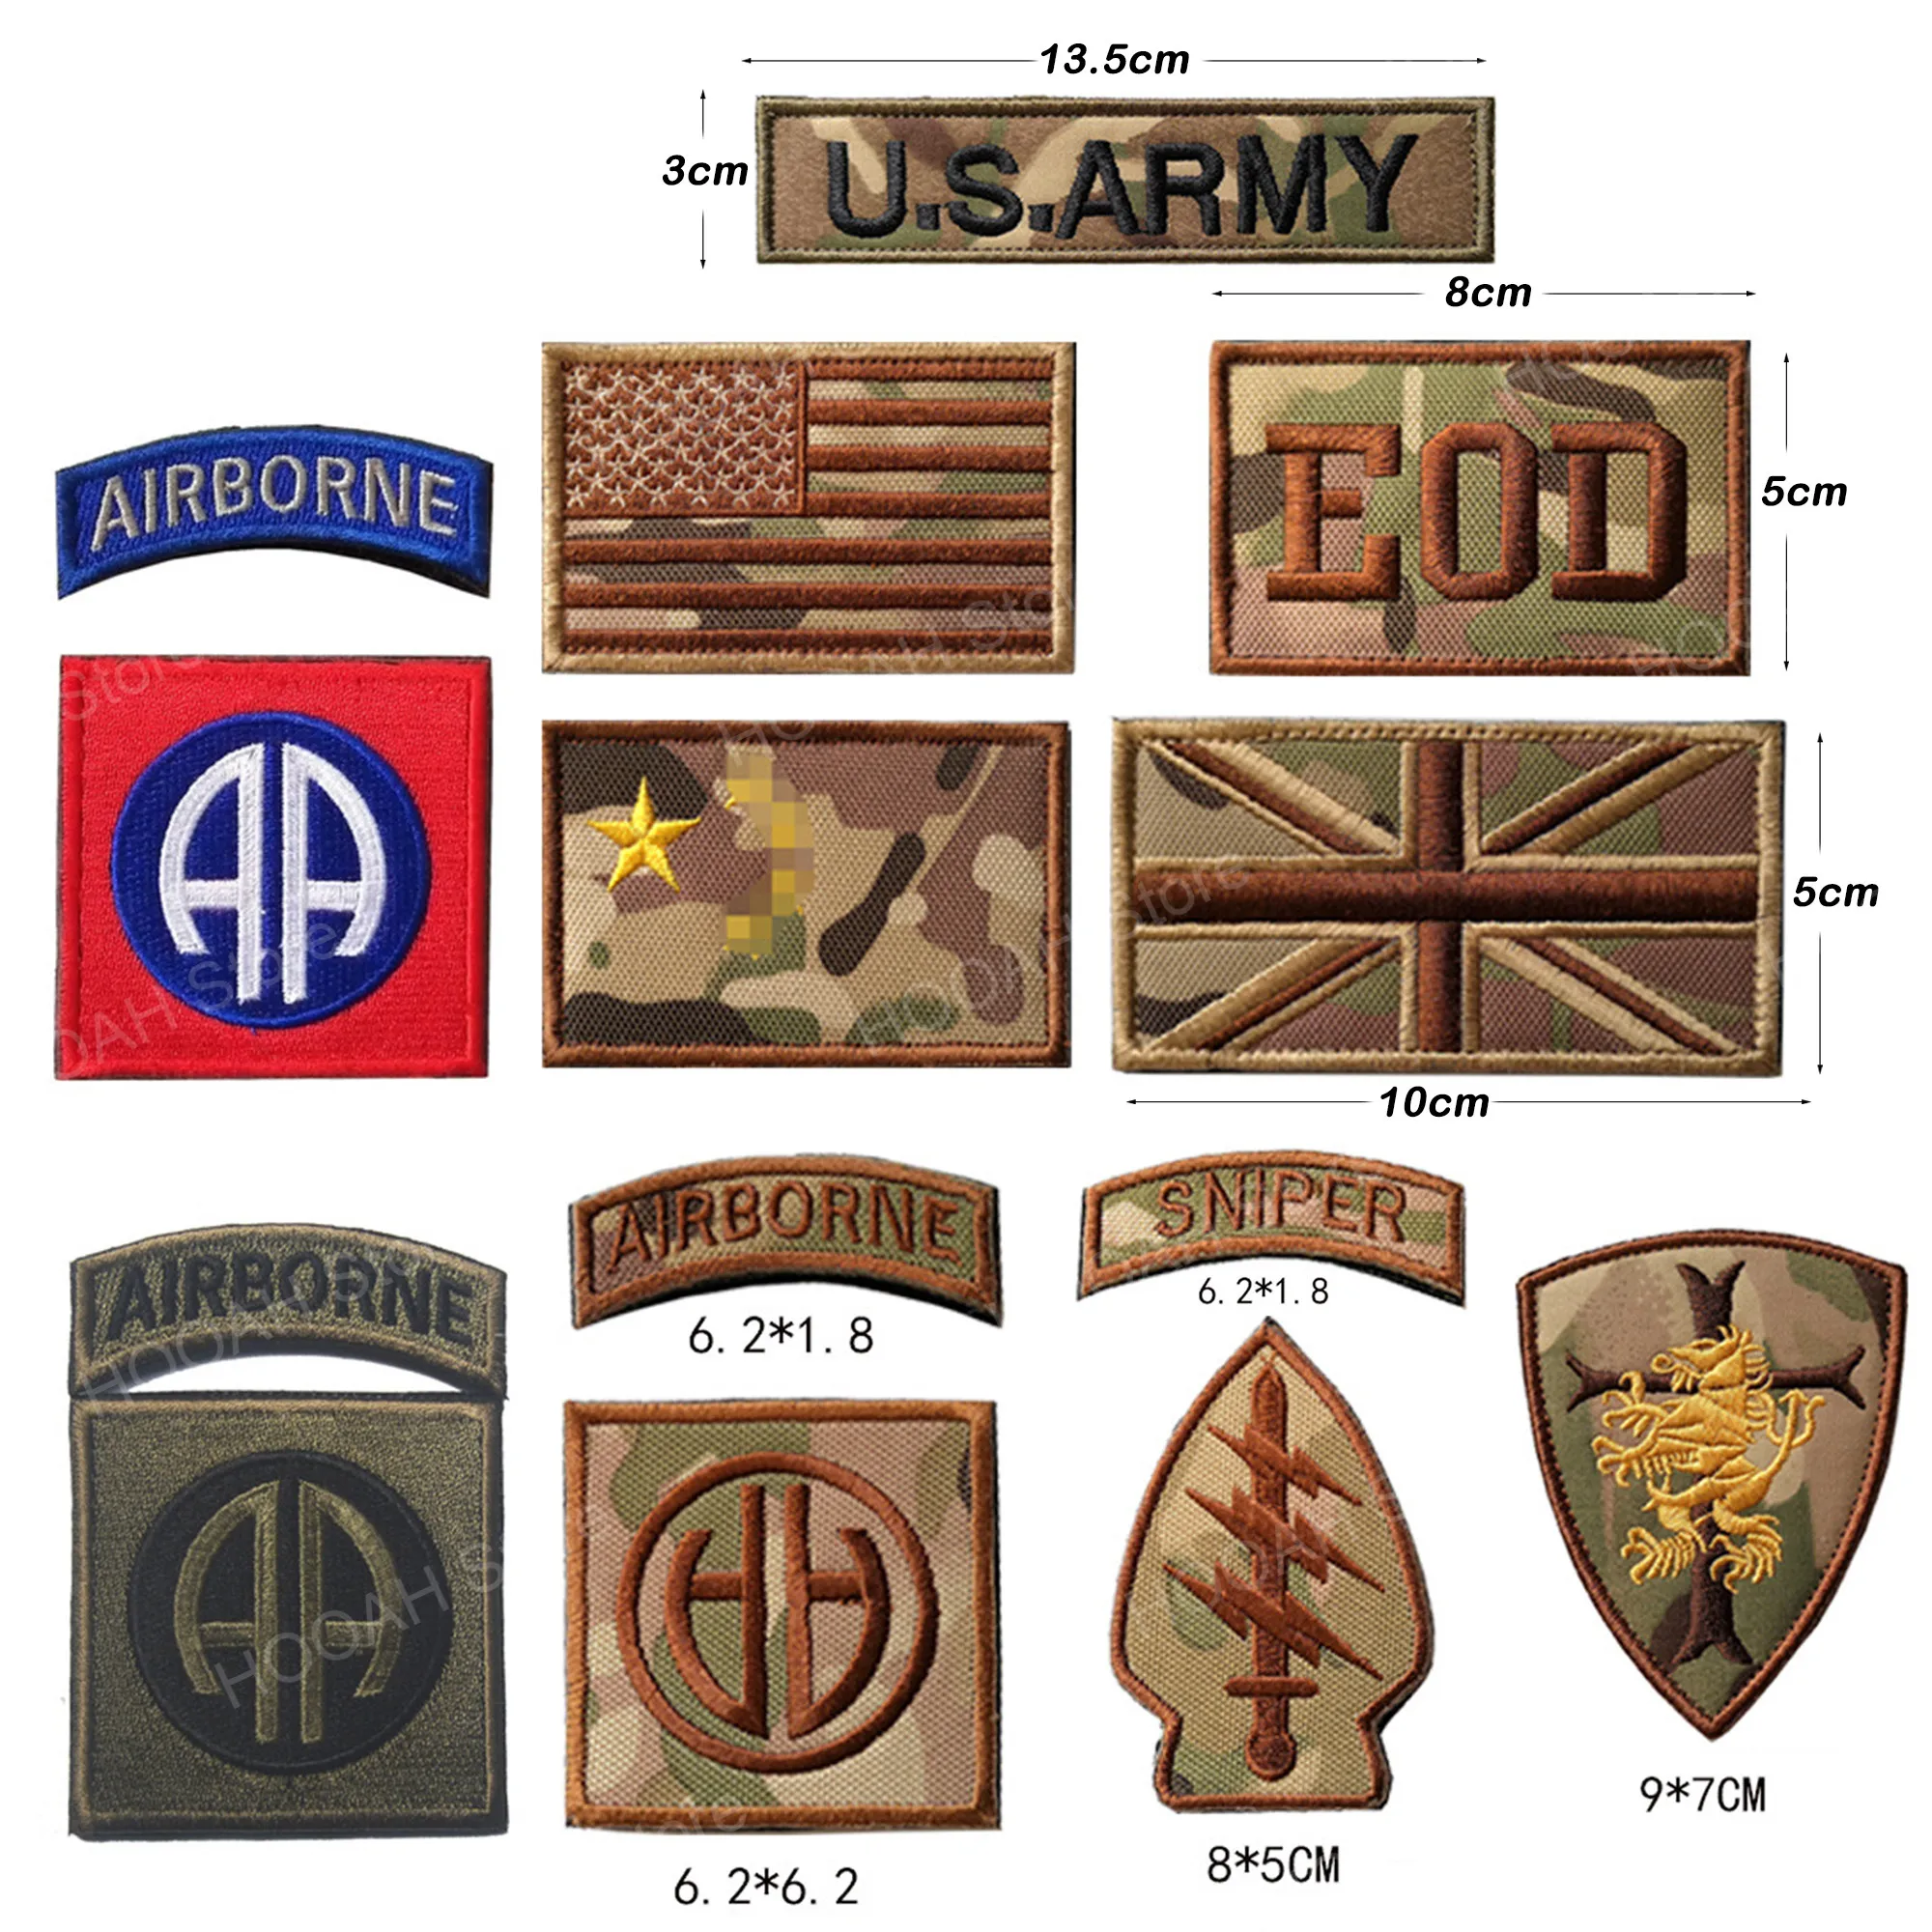 U.S. ARMY Patch EOD Unit SNIPER  Patch AIRBORNE Tactical Emblem UK USA flag Military Badges Appliques Armband Stickers CP